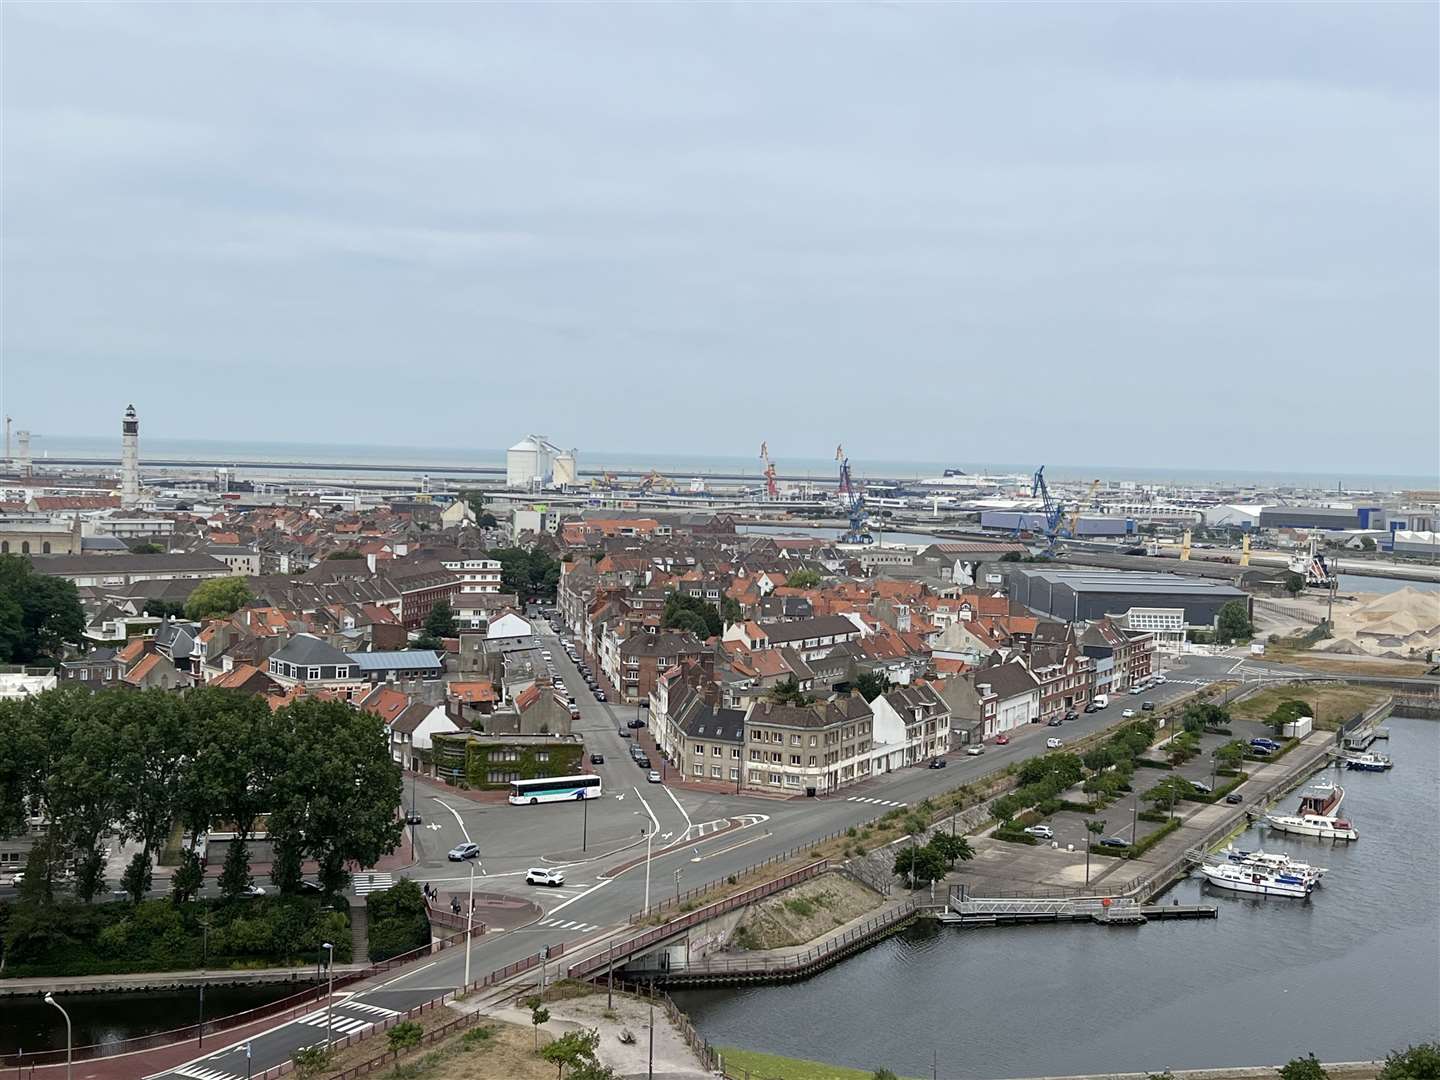 A view from the belfry, overlooking Calais